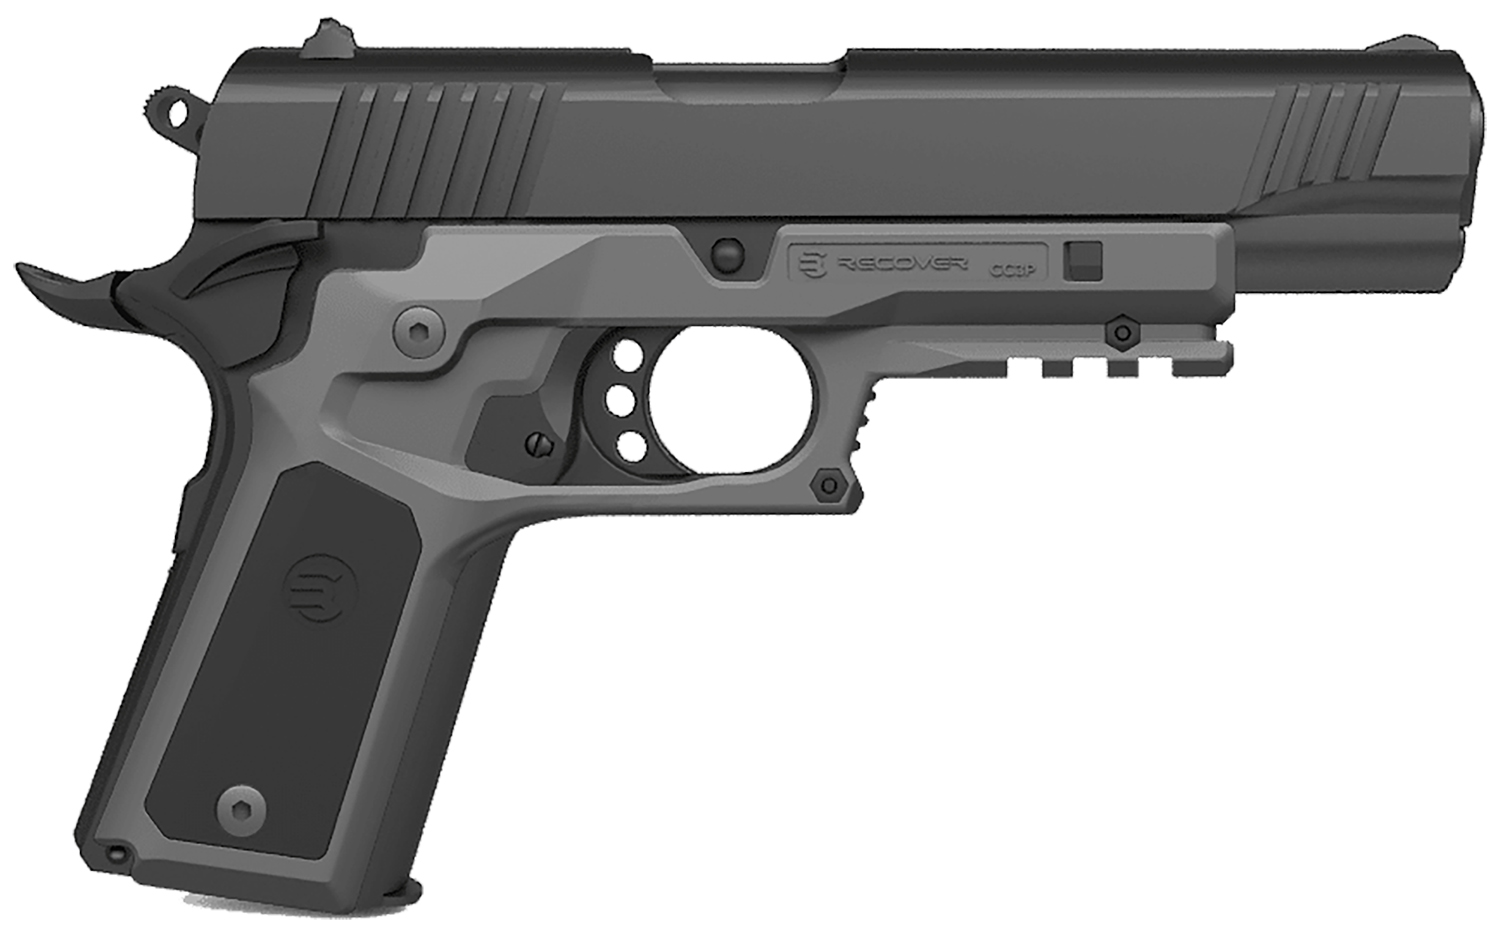 Recover Tactical CC3P-0401 Frame Grip  Gray Polymer Frame with Interchangeable Black & Gray Panels for Standard Frame 1911